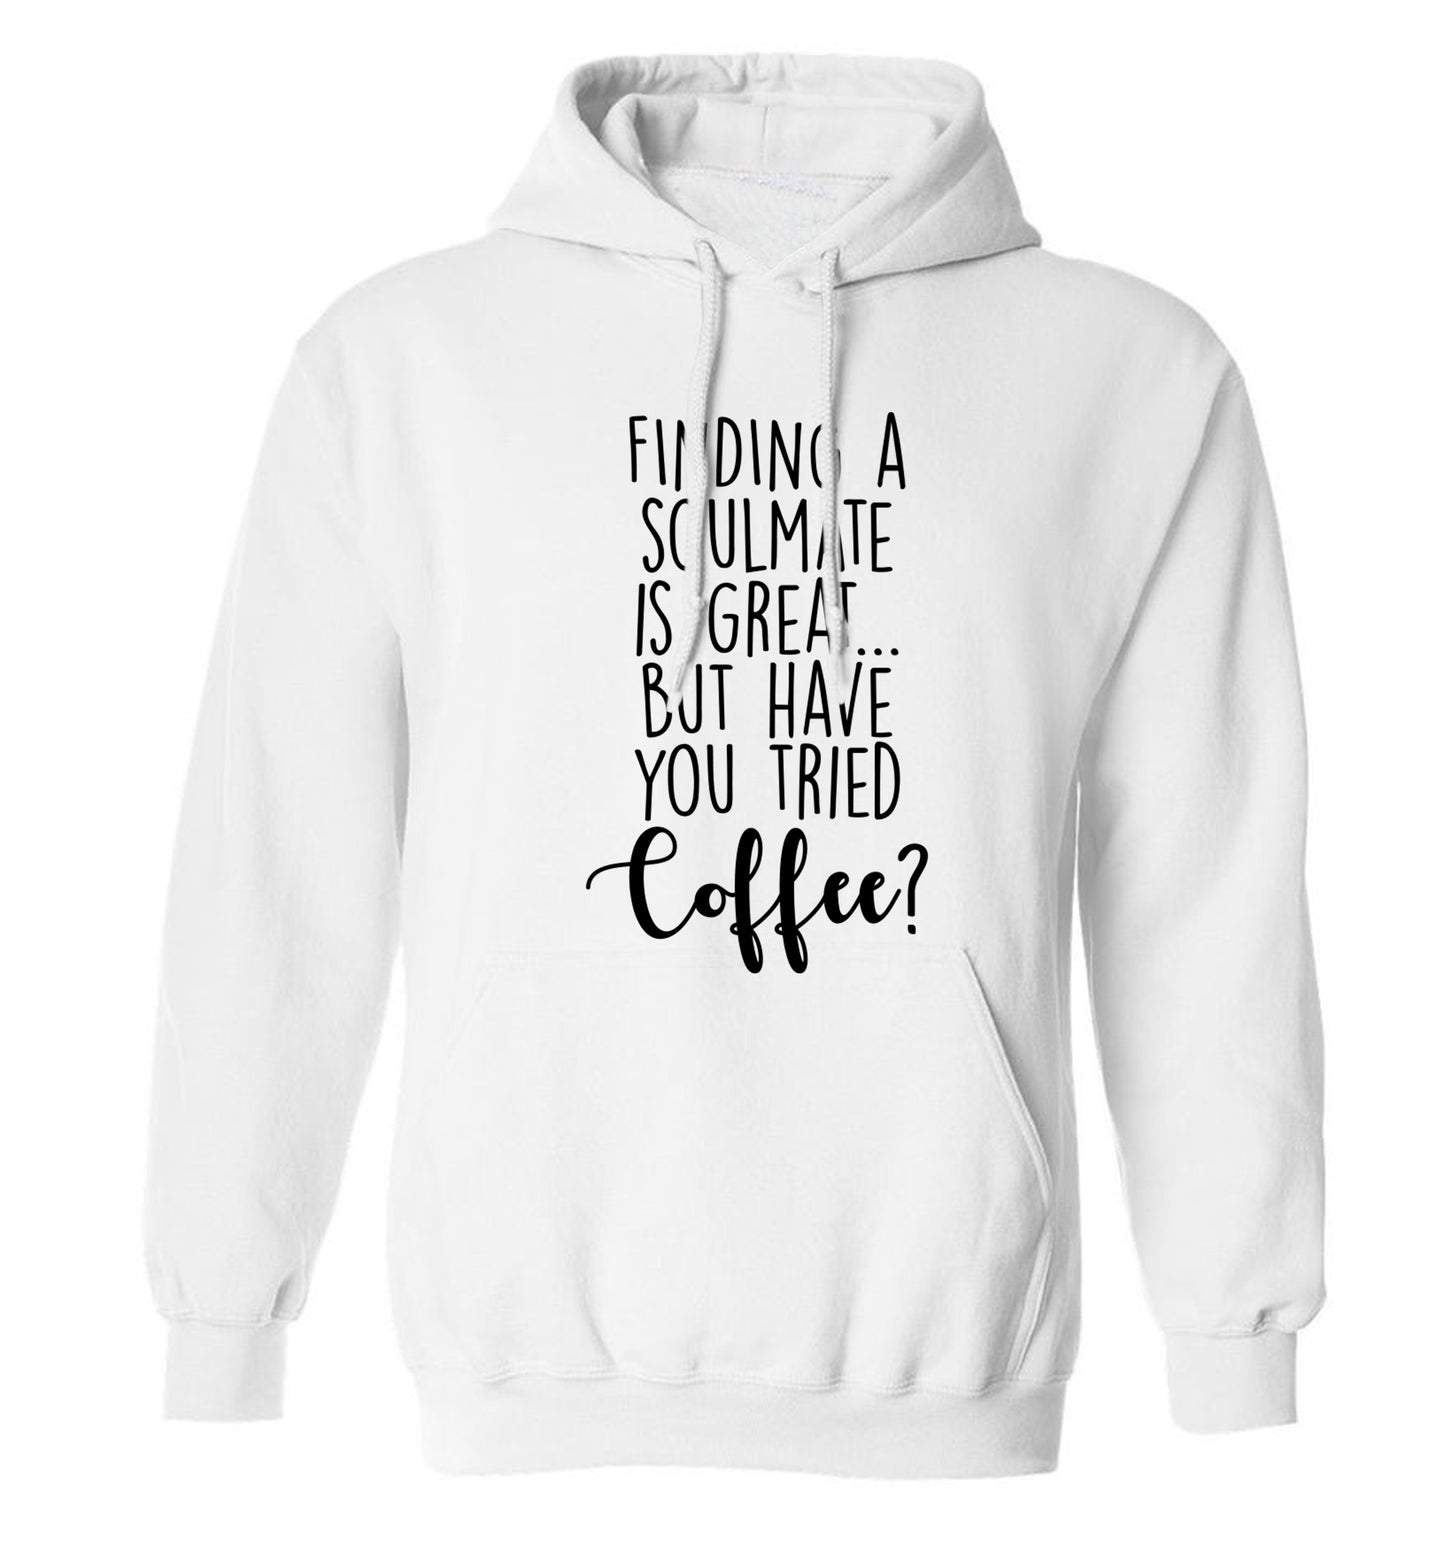 Finding a soulmate is great but have you tried coffee? adults unisex white hoodie 2XL